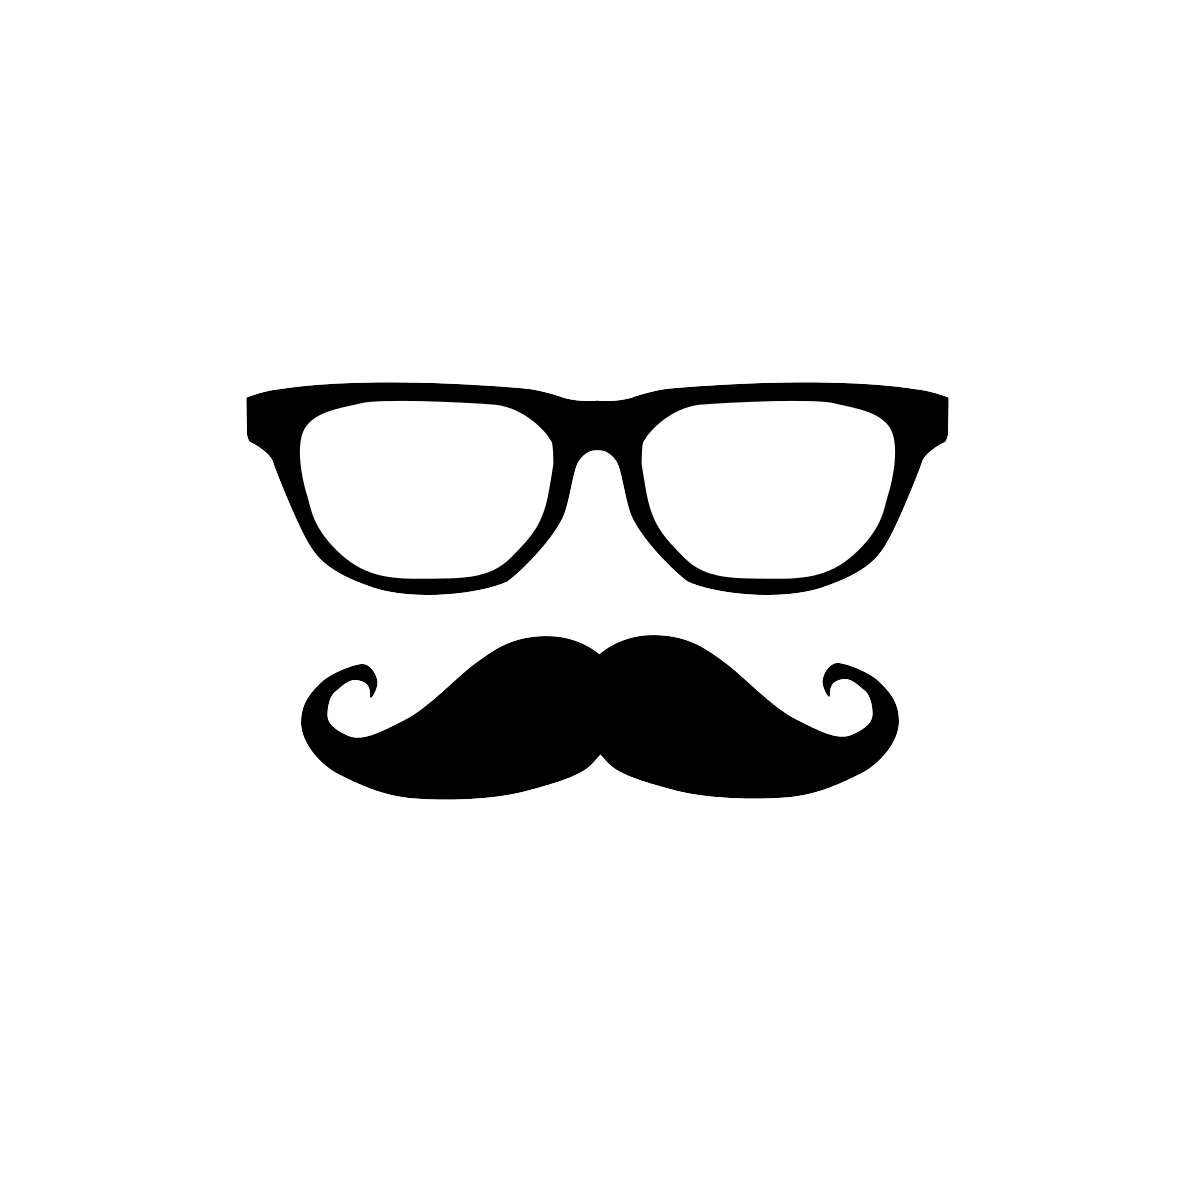 Sunglasses clipart overlay. Hipster google search pinterest